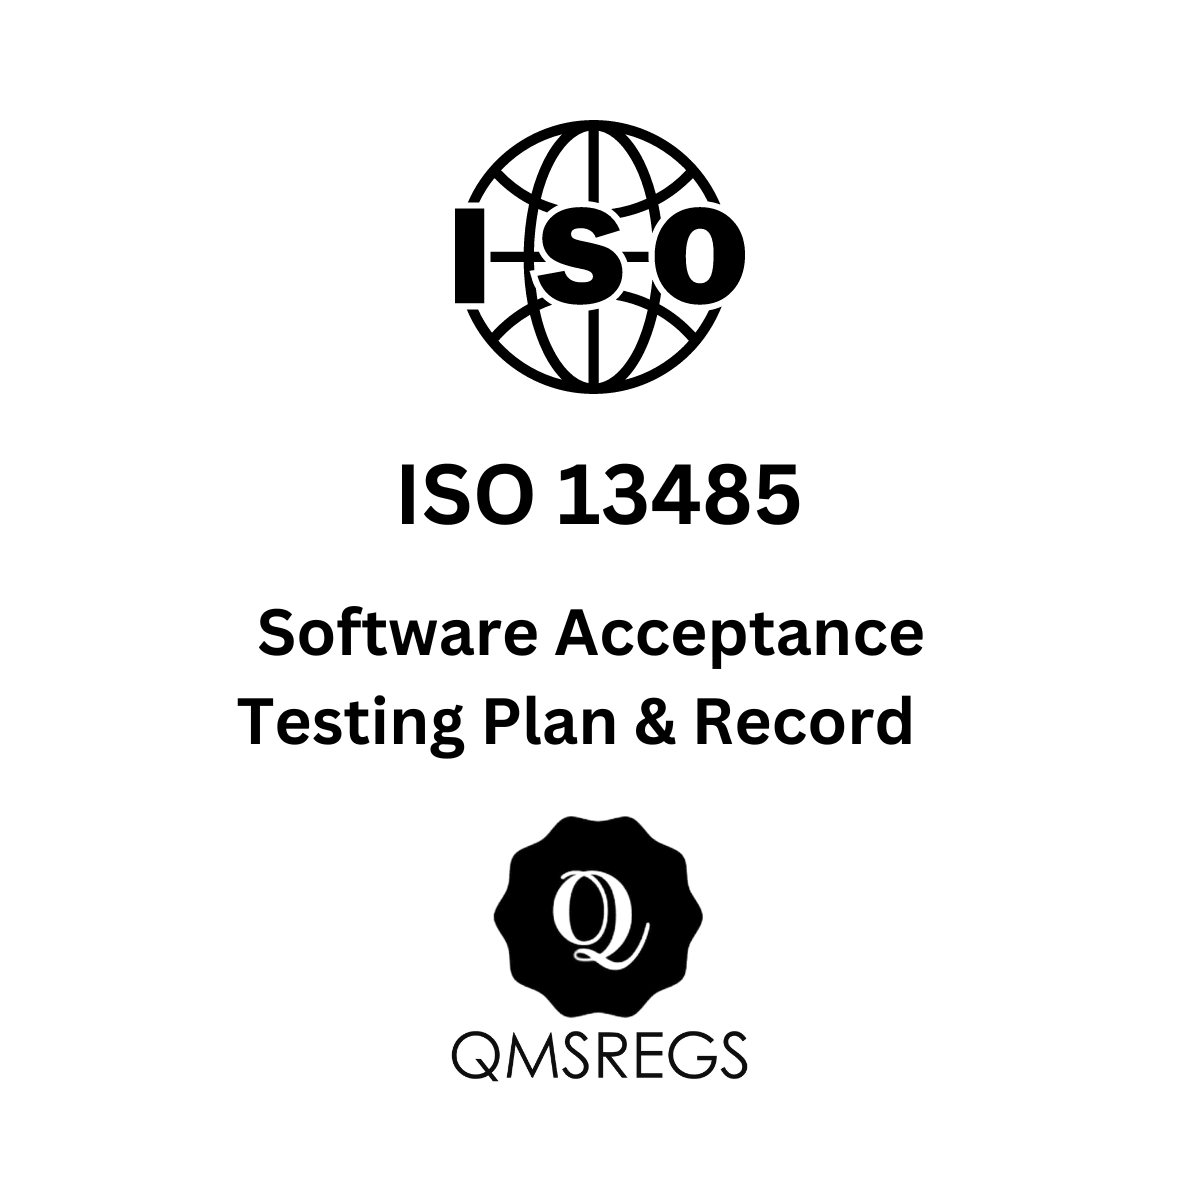 ISO 13485 Software Acceptance testing Plan and Record